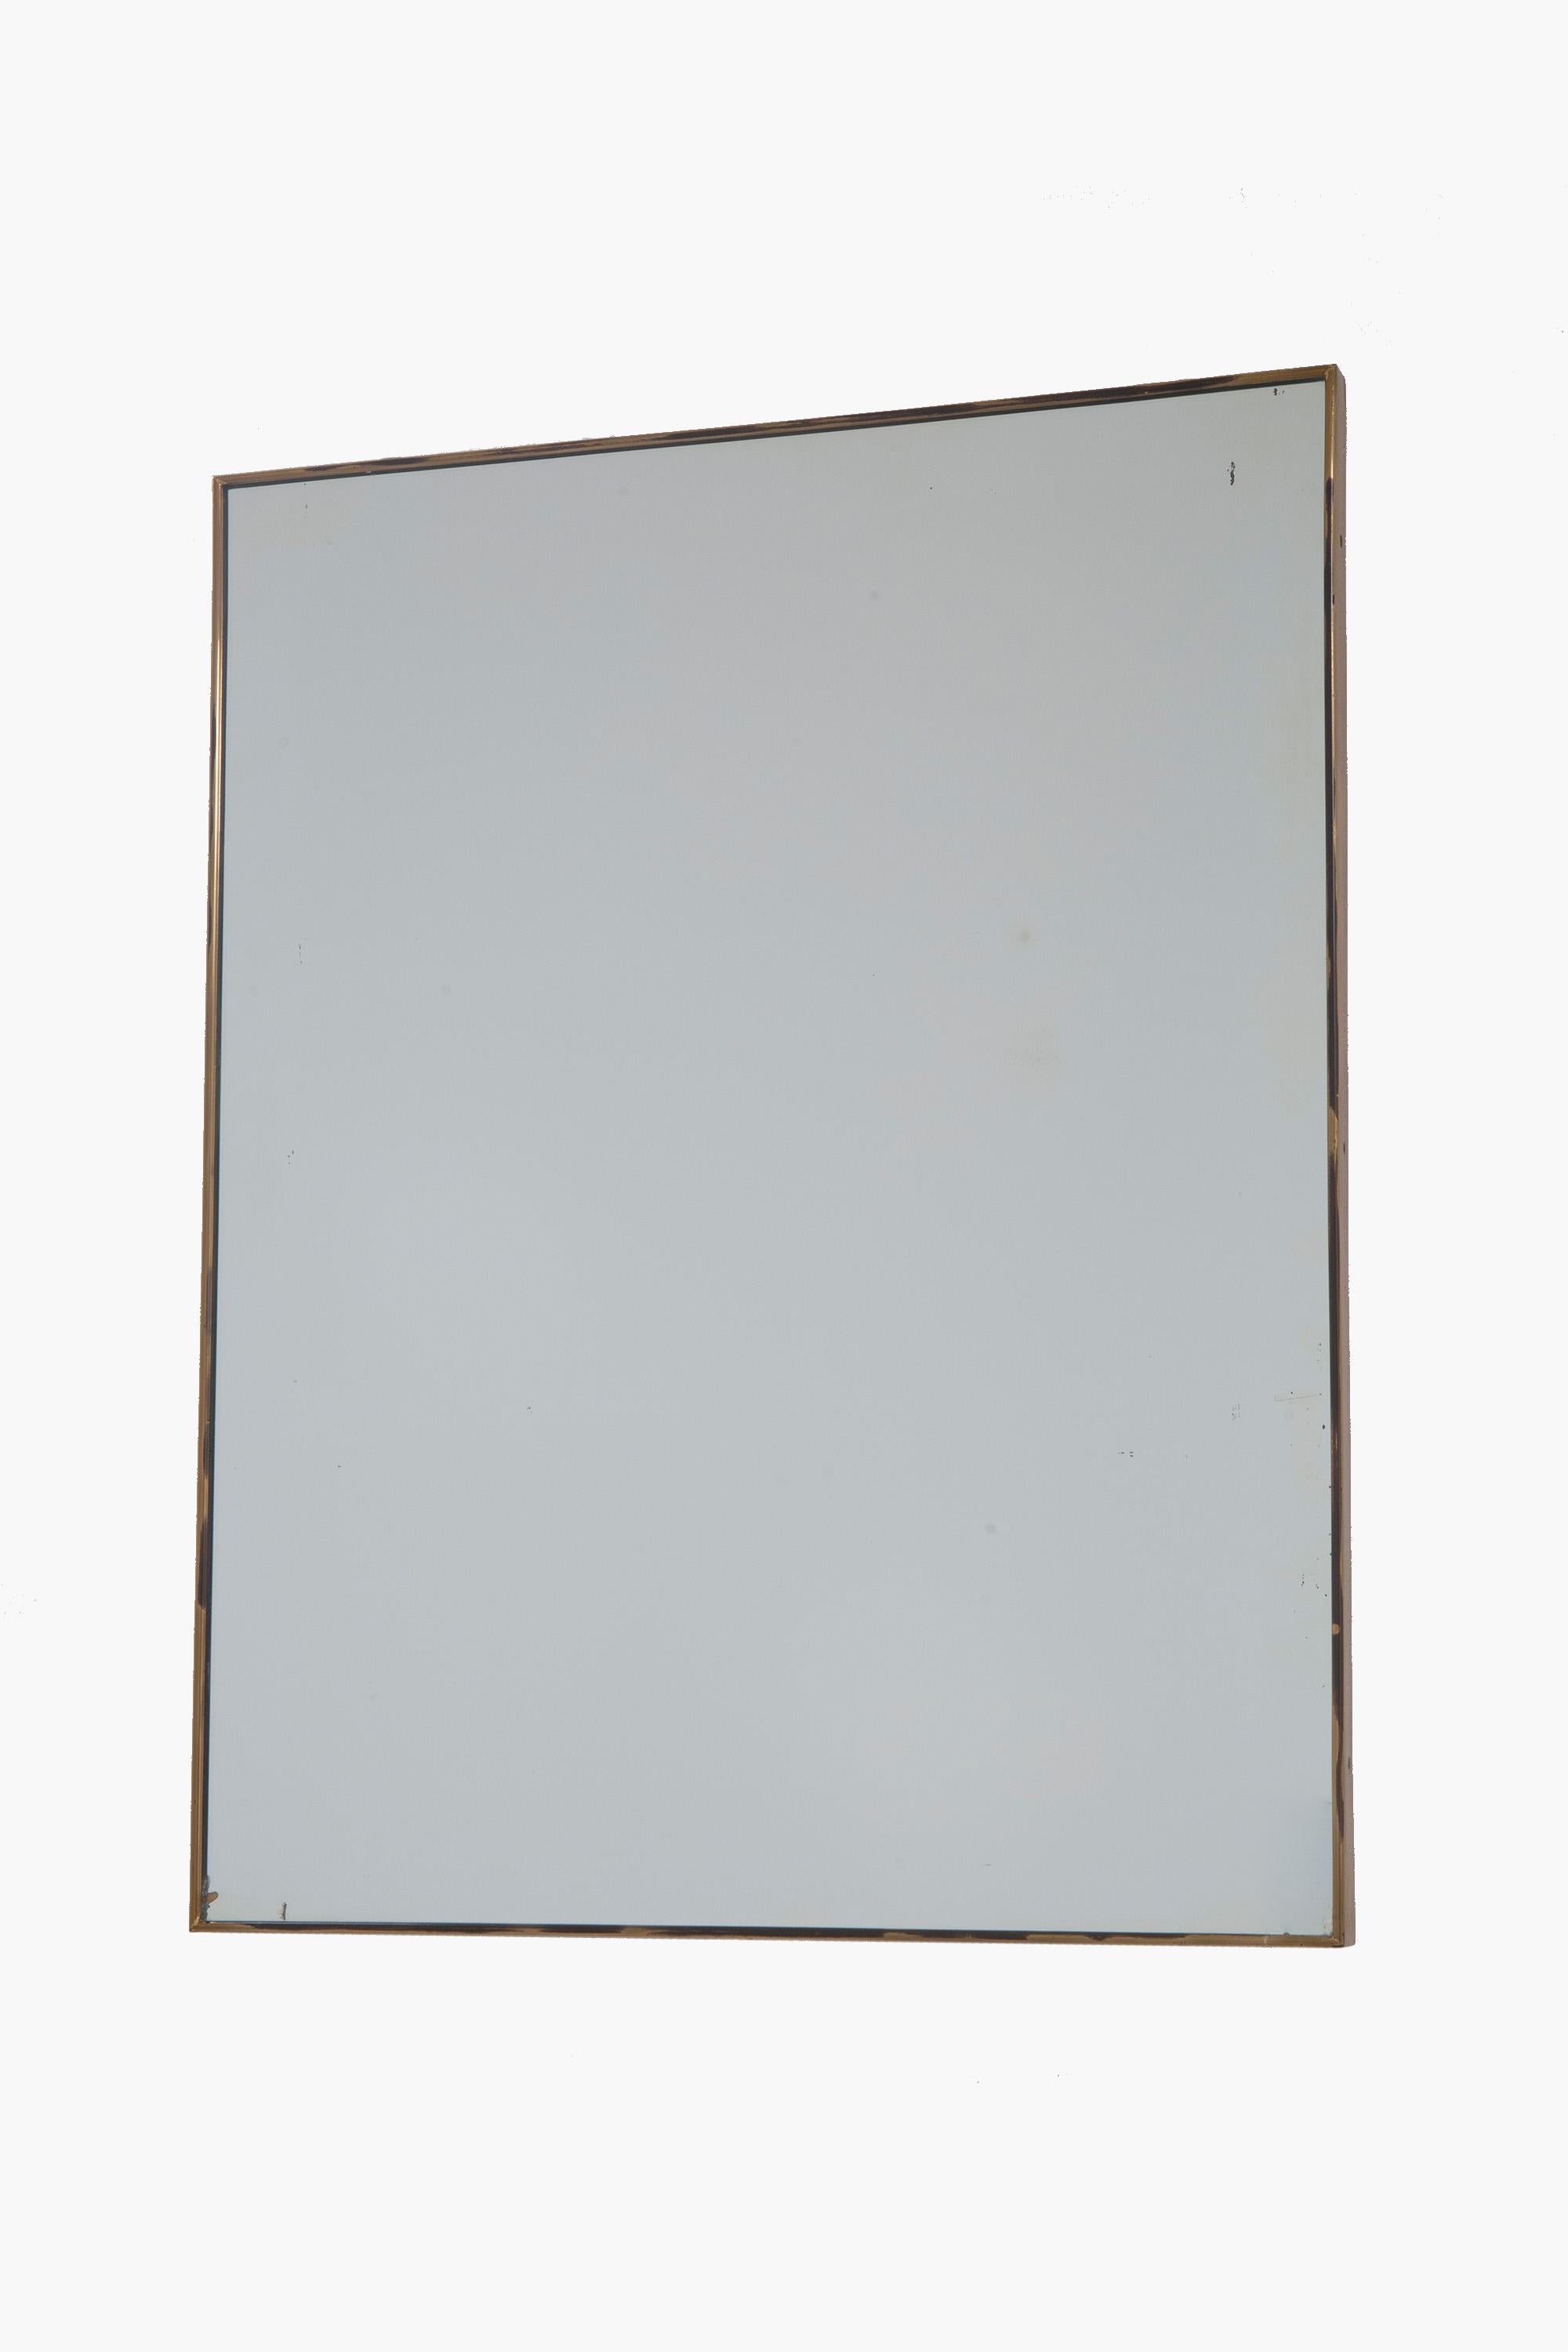 A 1950s Italian brass framed wall mirror. 

Useful size and good rectangular proportions.

Overall very good condition. The gilt finish is rubbed back to antique brass in places. Small areas of foxing to the mirror plate commensurate with age.